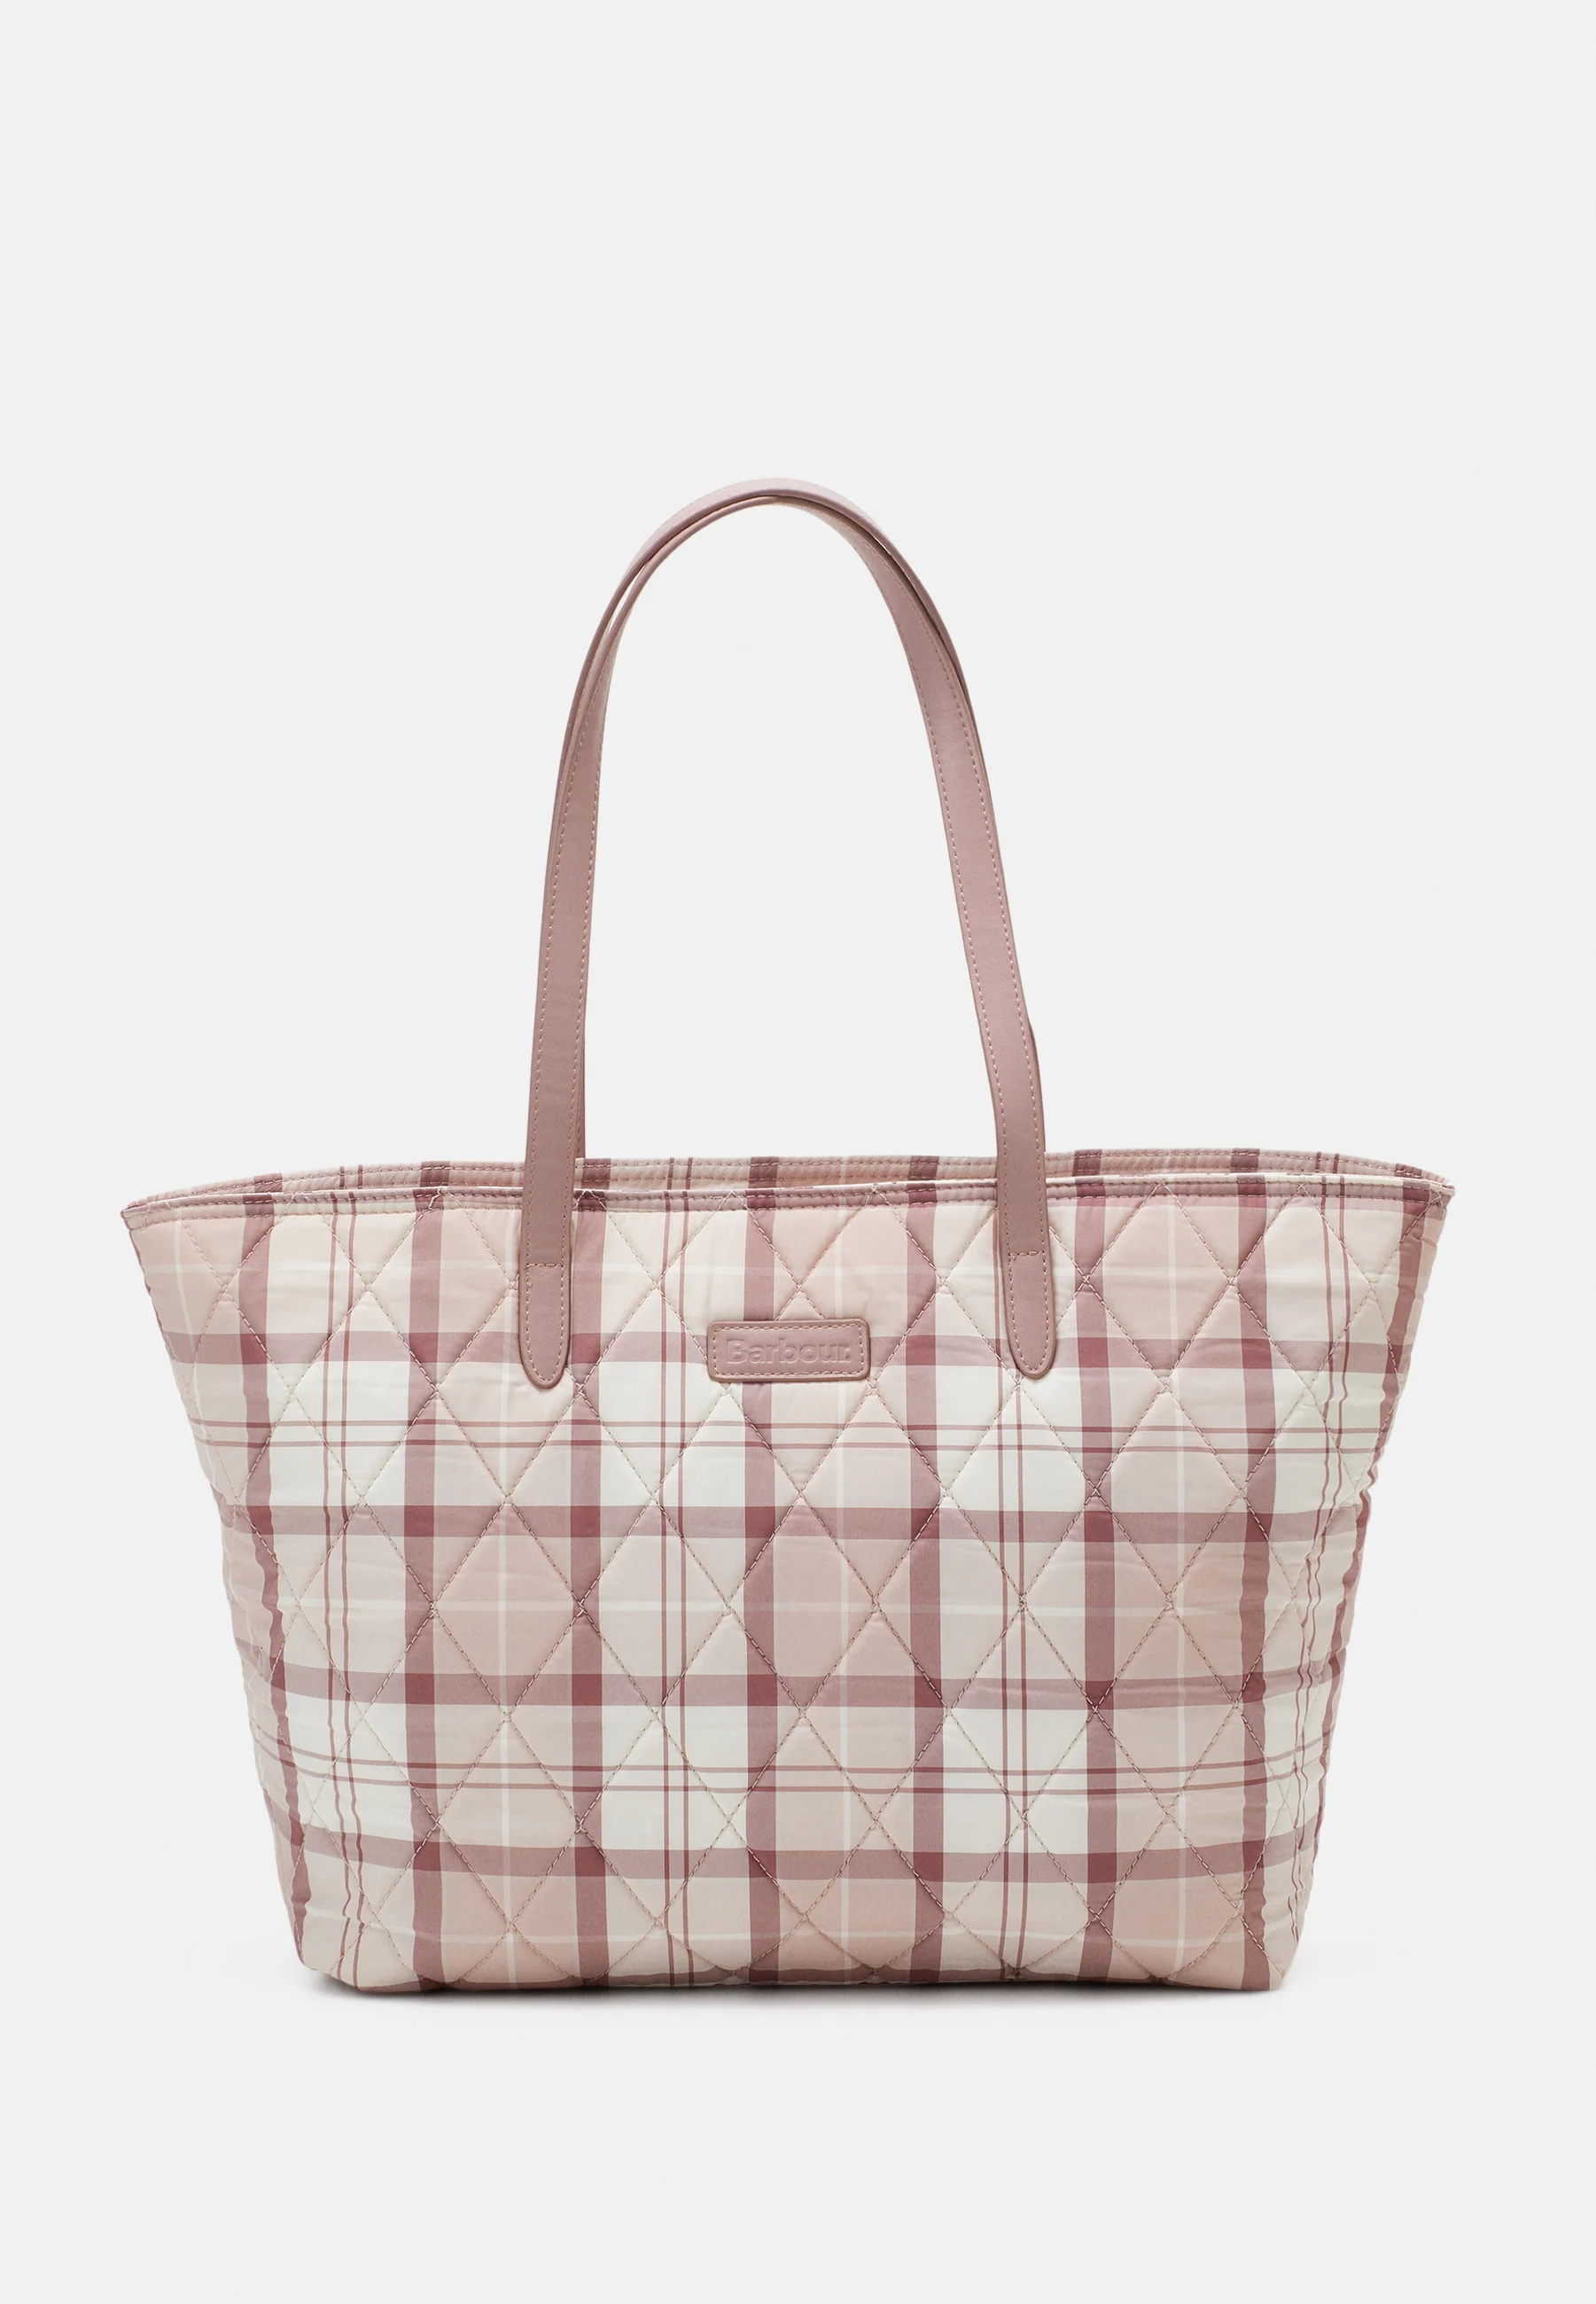 Trending Totes — WOMAN'S WAY